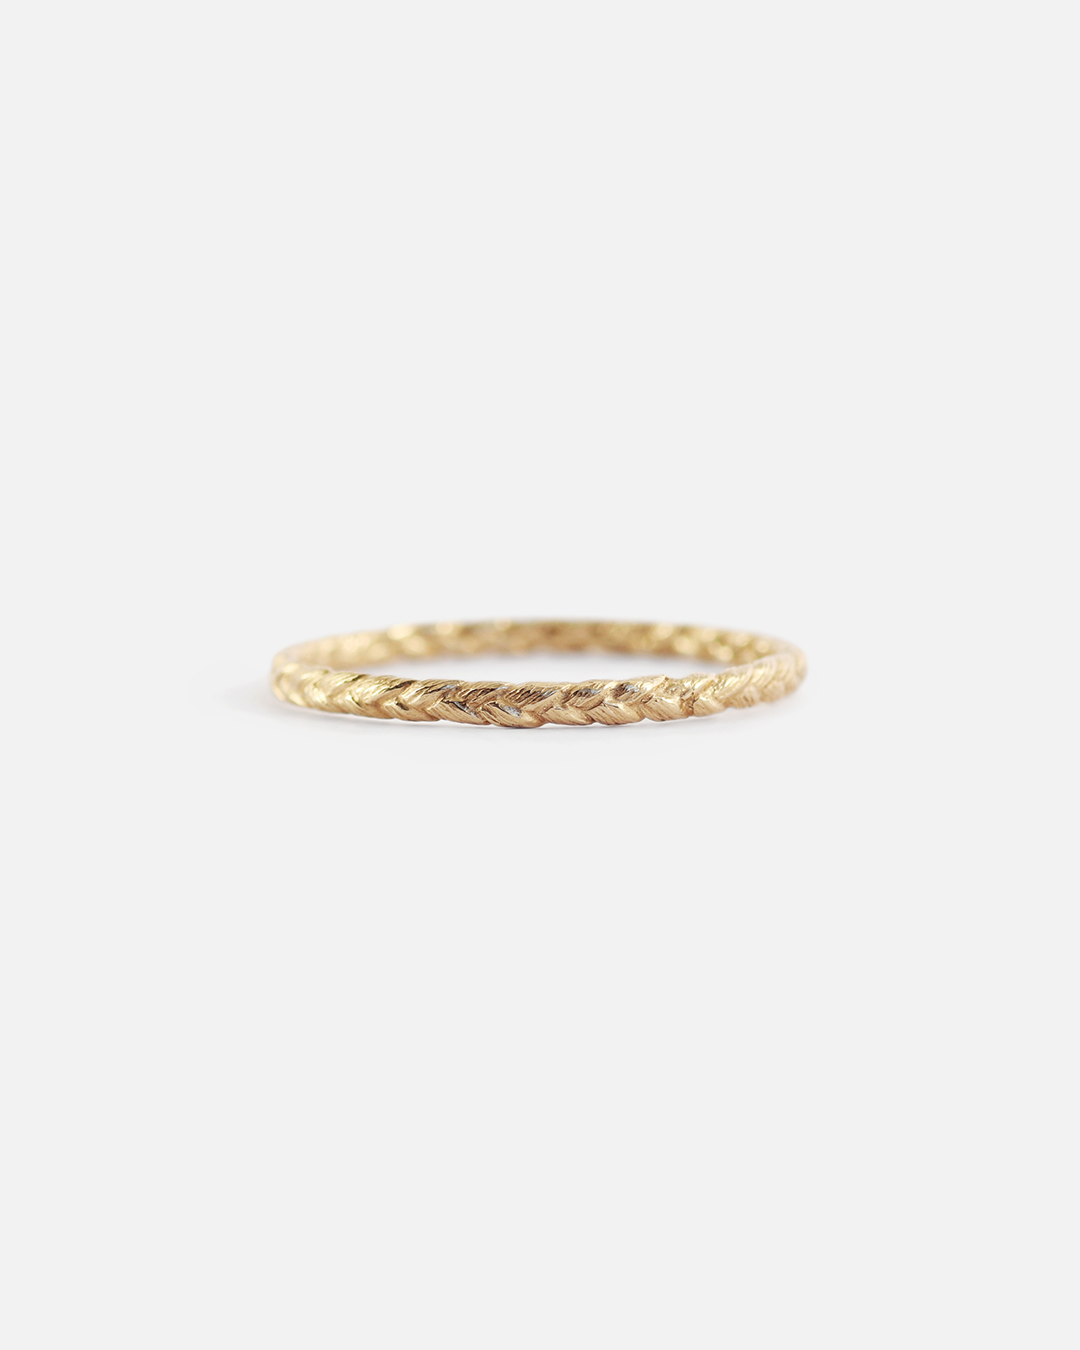 Braid Ring / Small By Katrina La Penne in rings Category